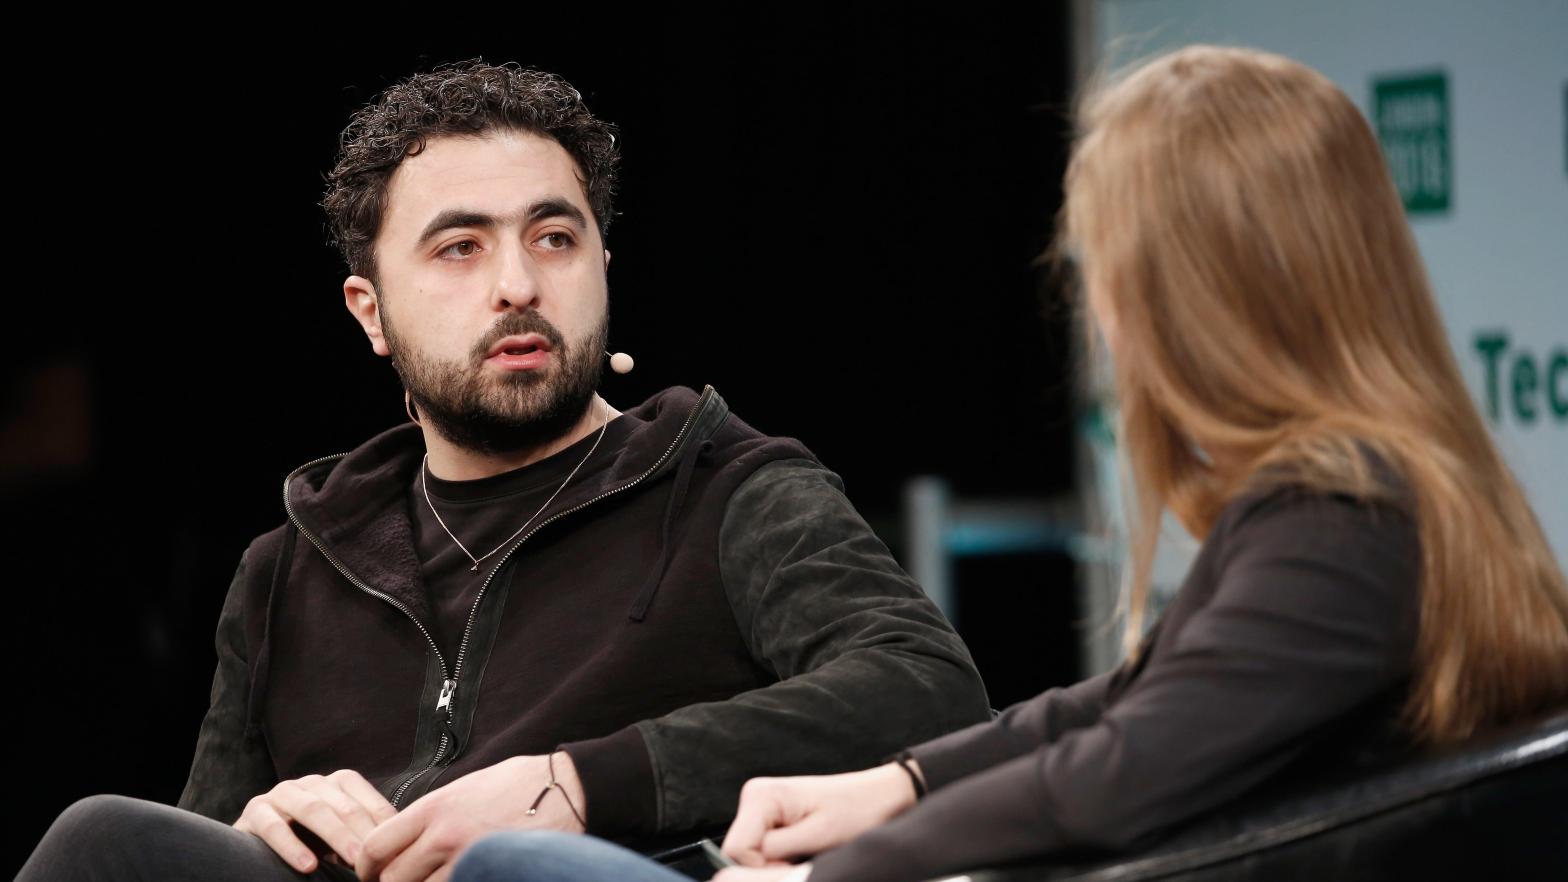 DeepMind co-founder Mustafa Suleyman has his own startup called Inflection AI. His premiere product called Pi is specifically limited from offering folks financial advice or new products. (Photo: John Phillips, Getty Images)